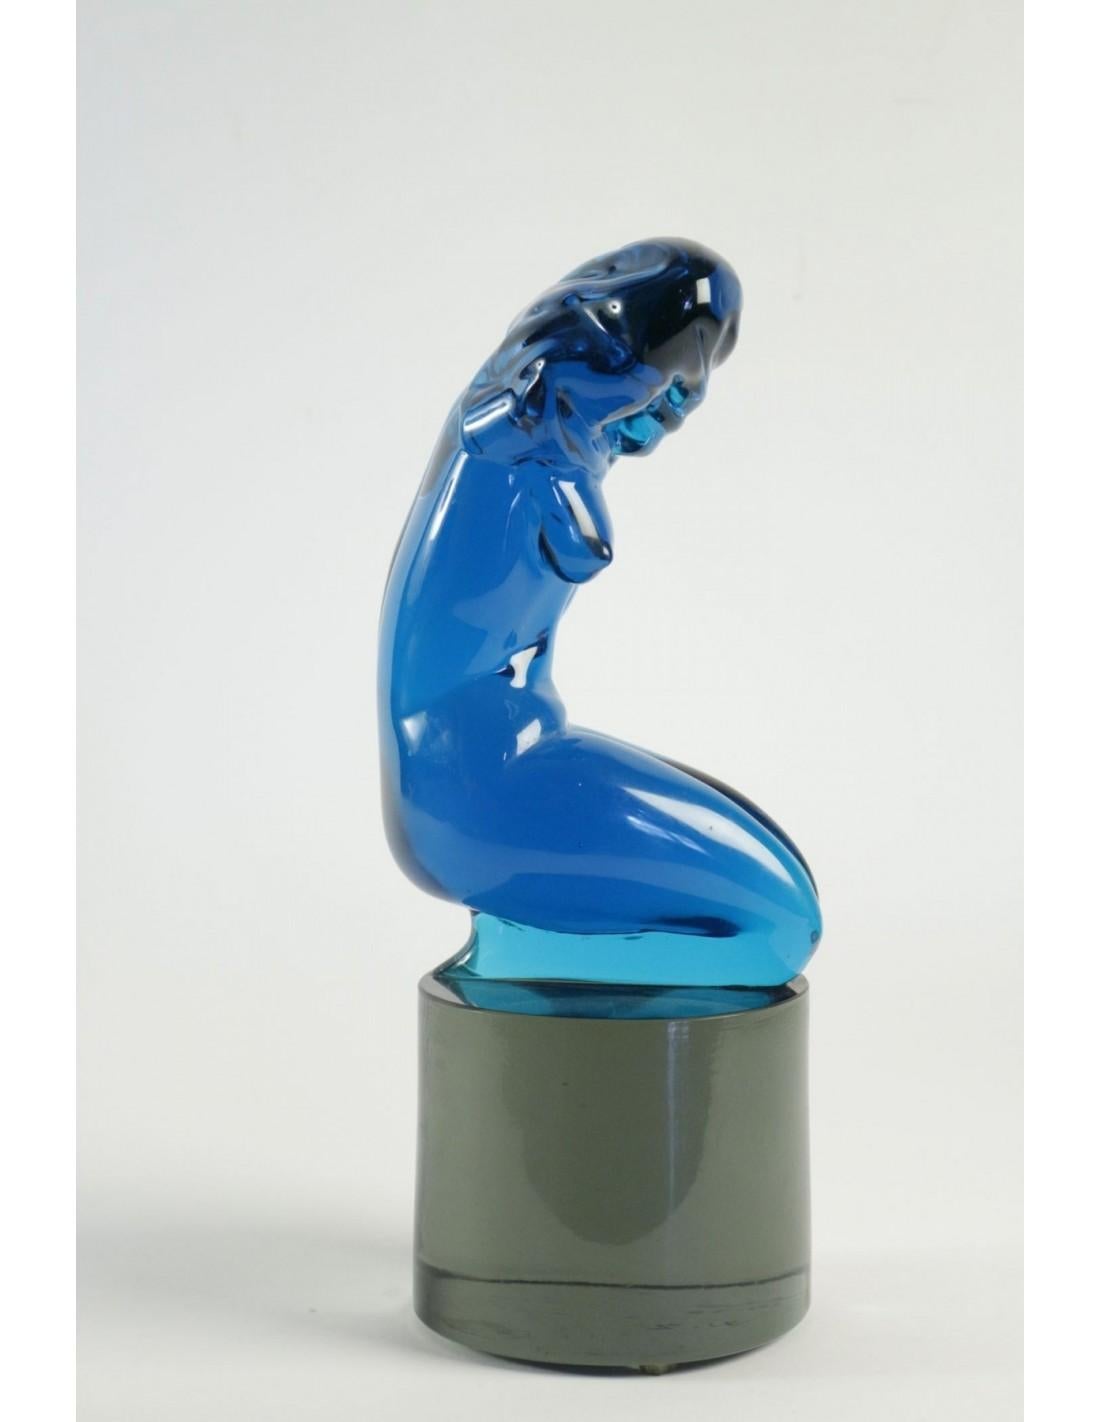 Important Statue of L.Rosin, Italy, Murano Glass Blue, Signed 1